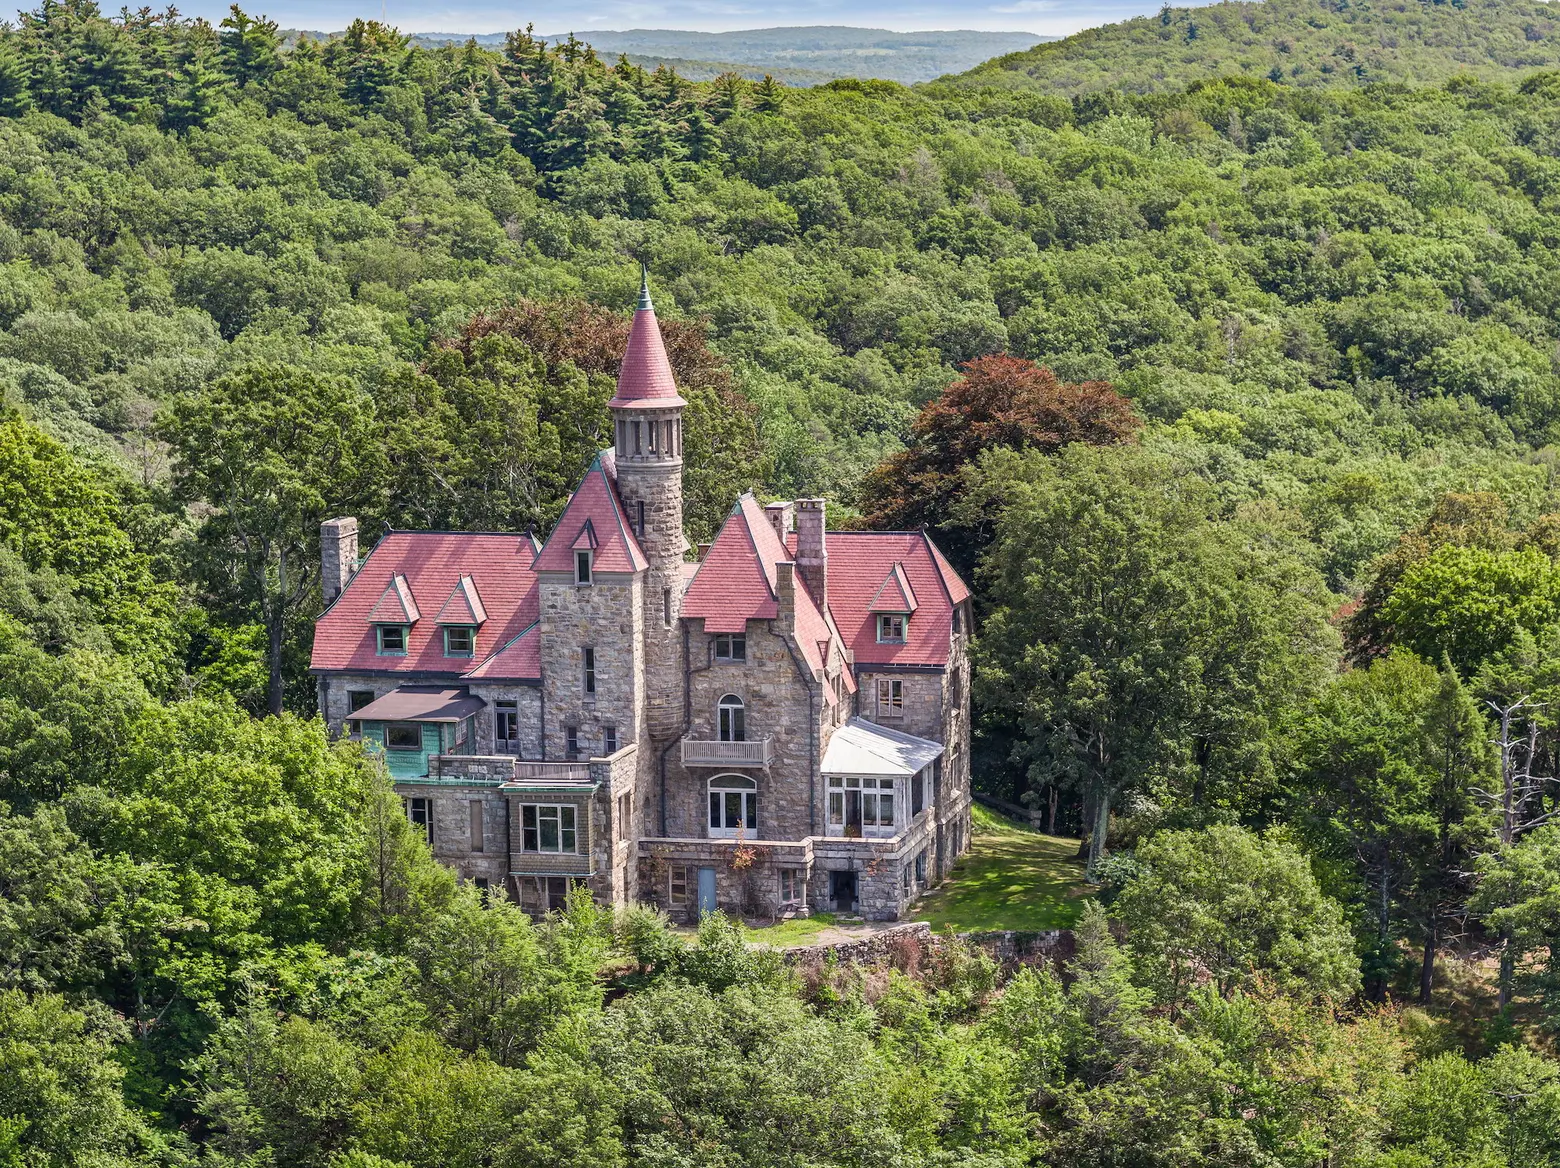 Live in your very own 19th-century castle above the Hudson River for $3.5M